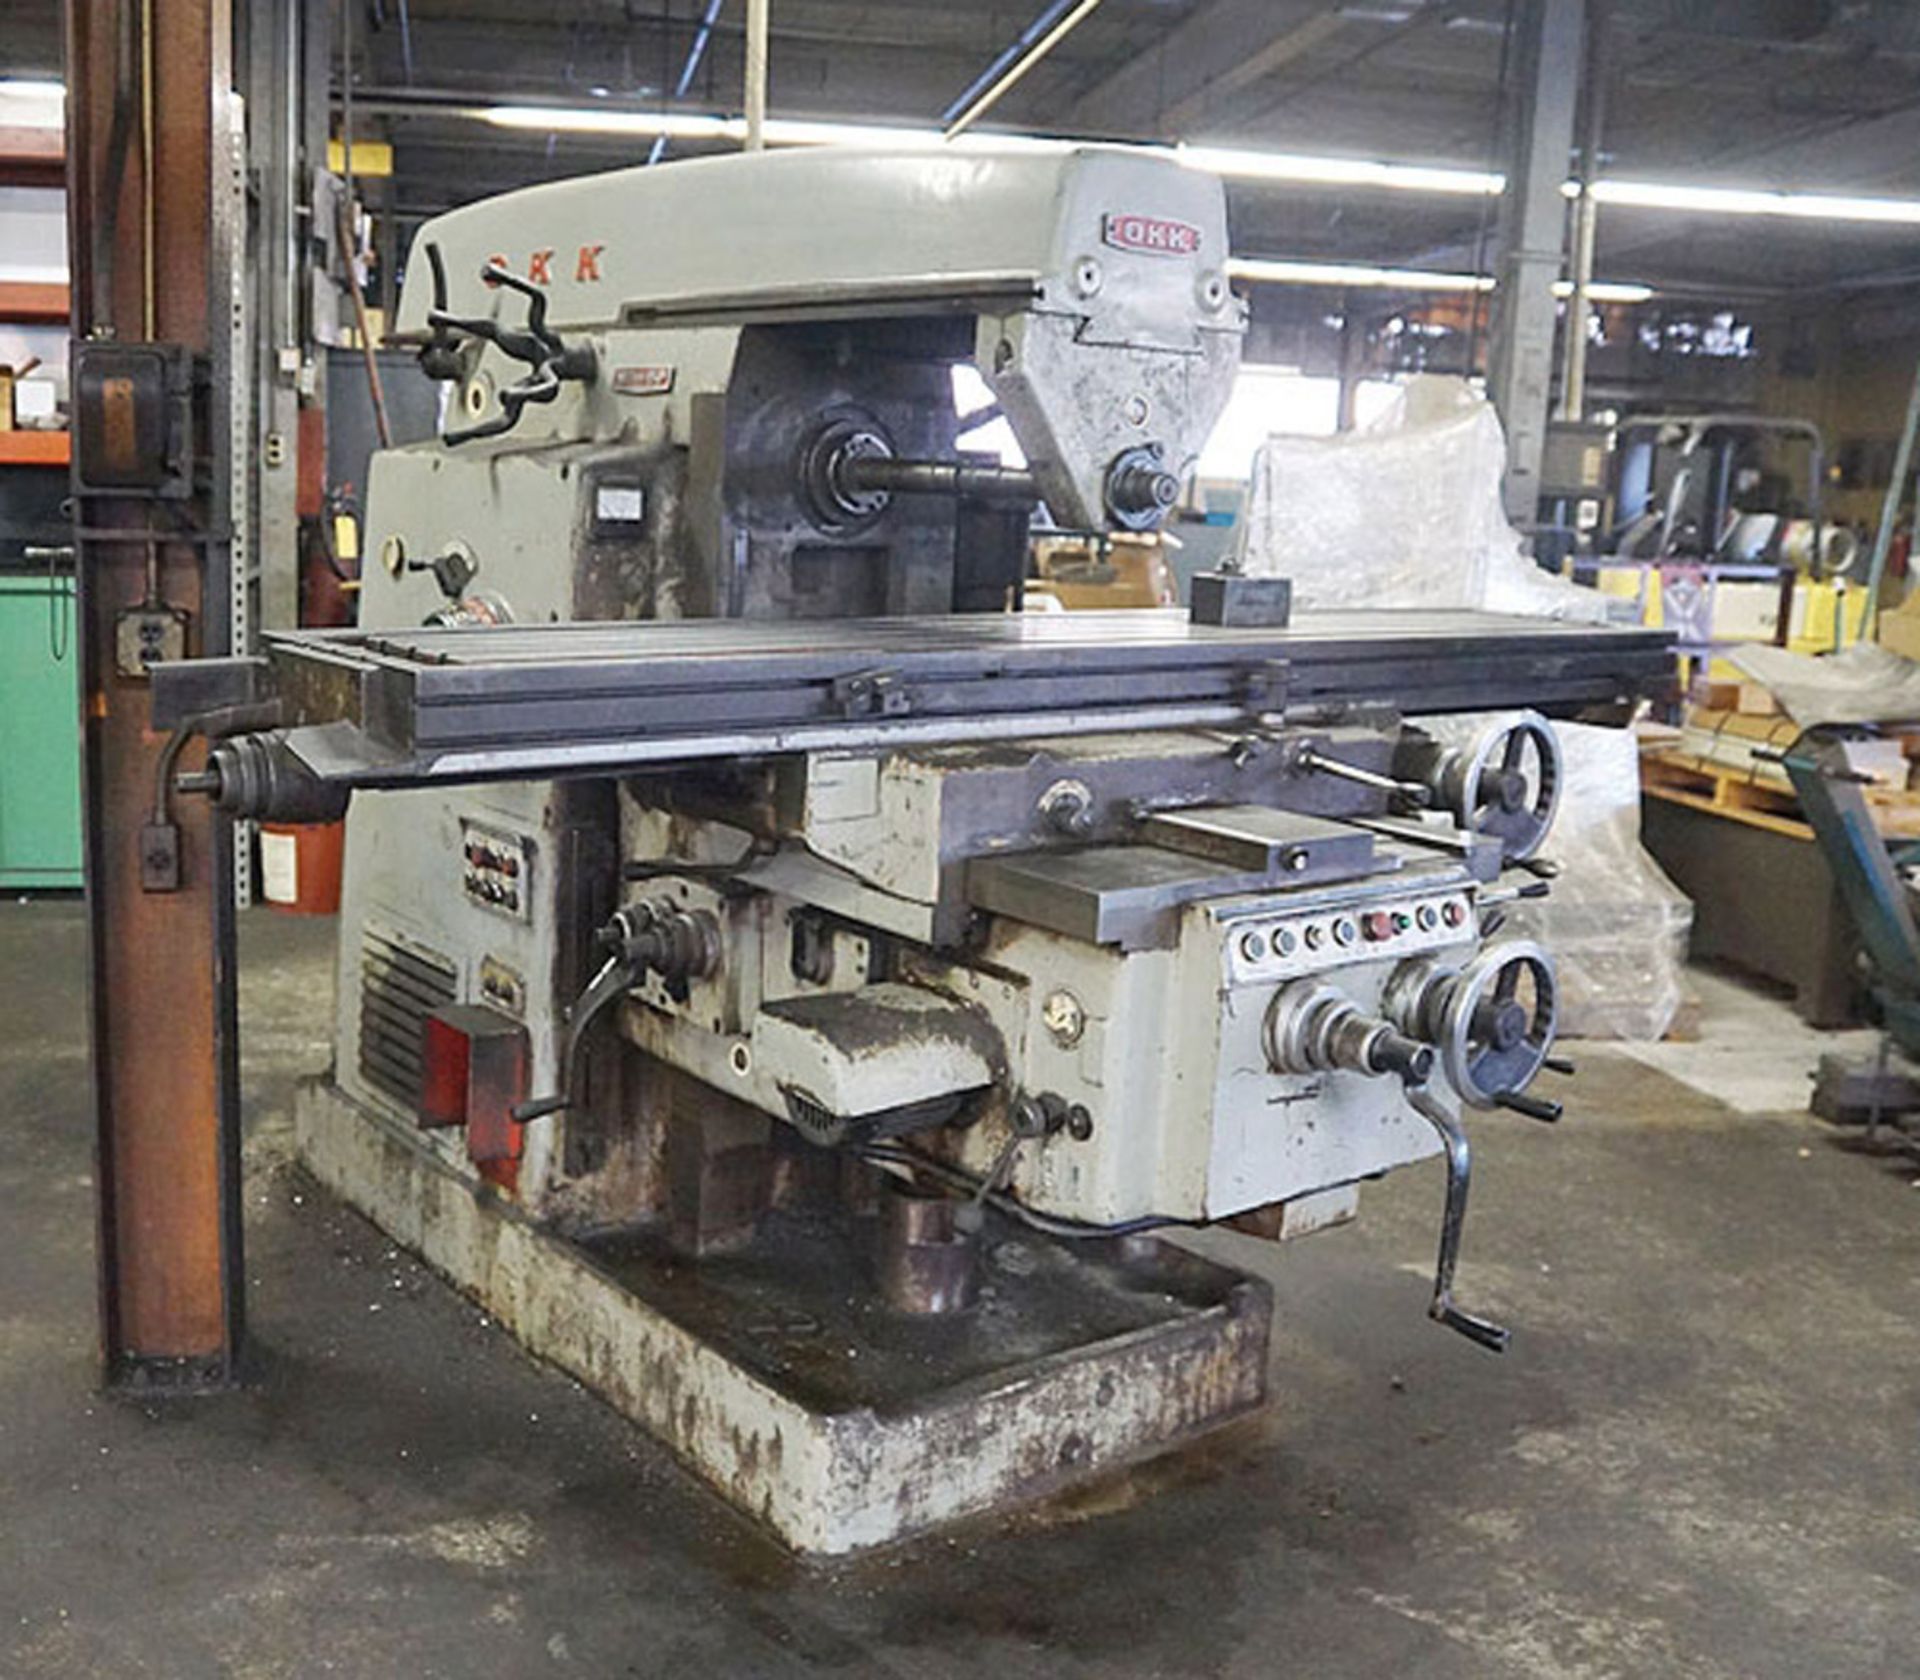 Okk - Horizontal Milling Machine | 18" x 96", Located In Painesville, OH - 7056P - Image 2 of 15